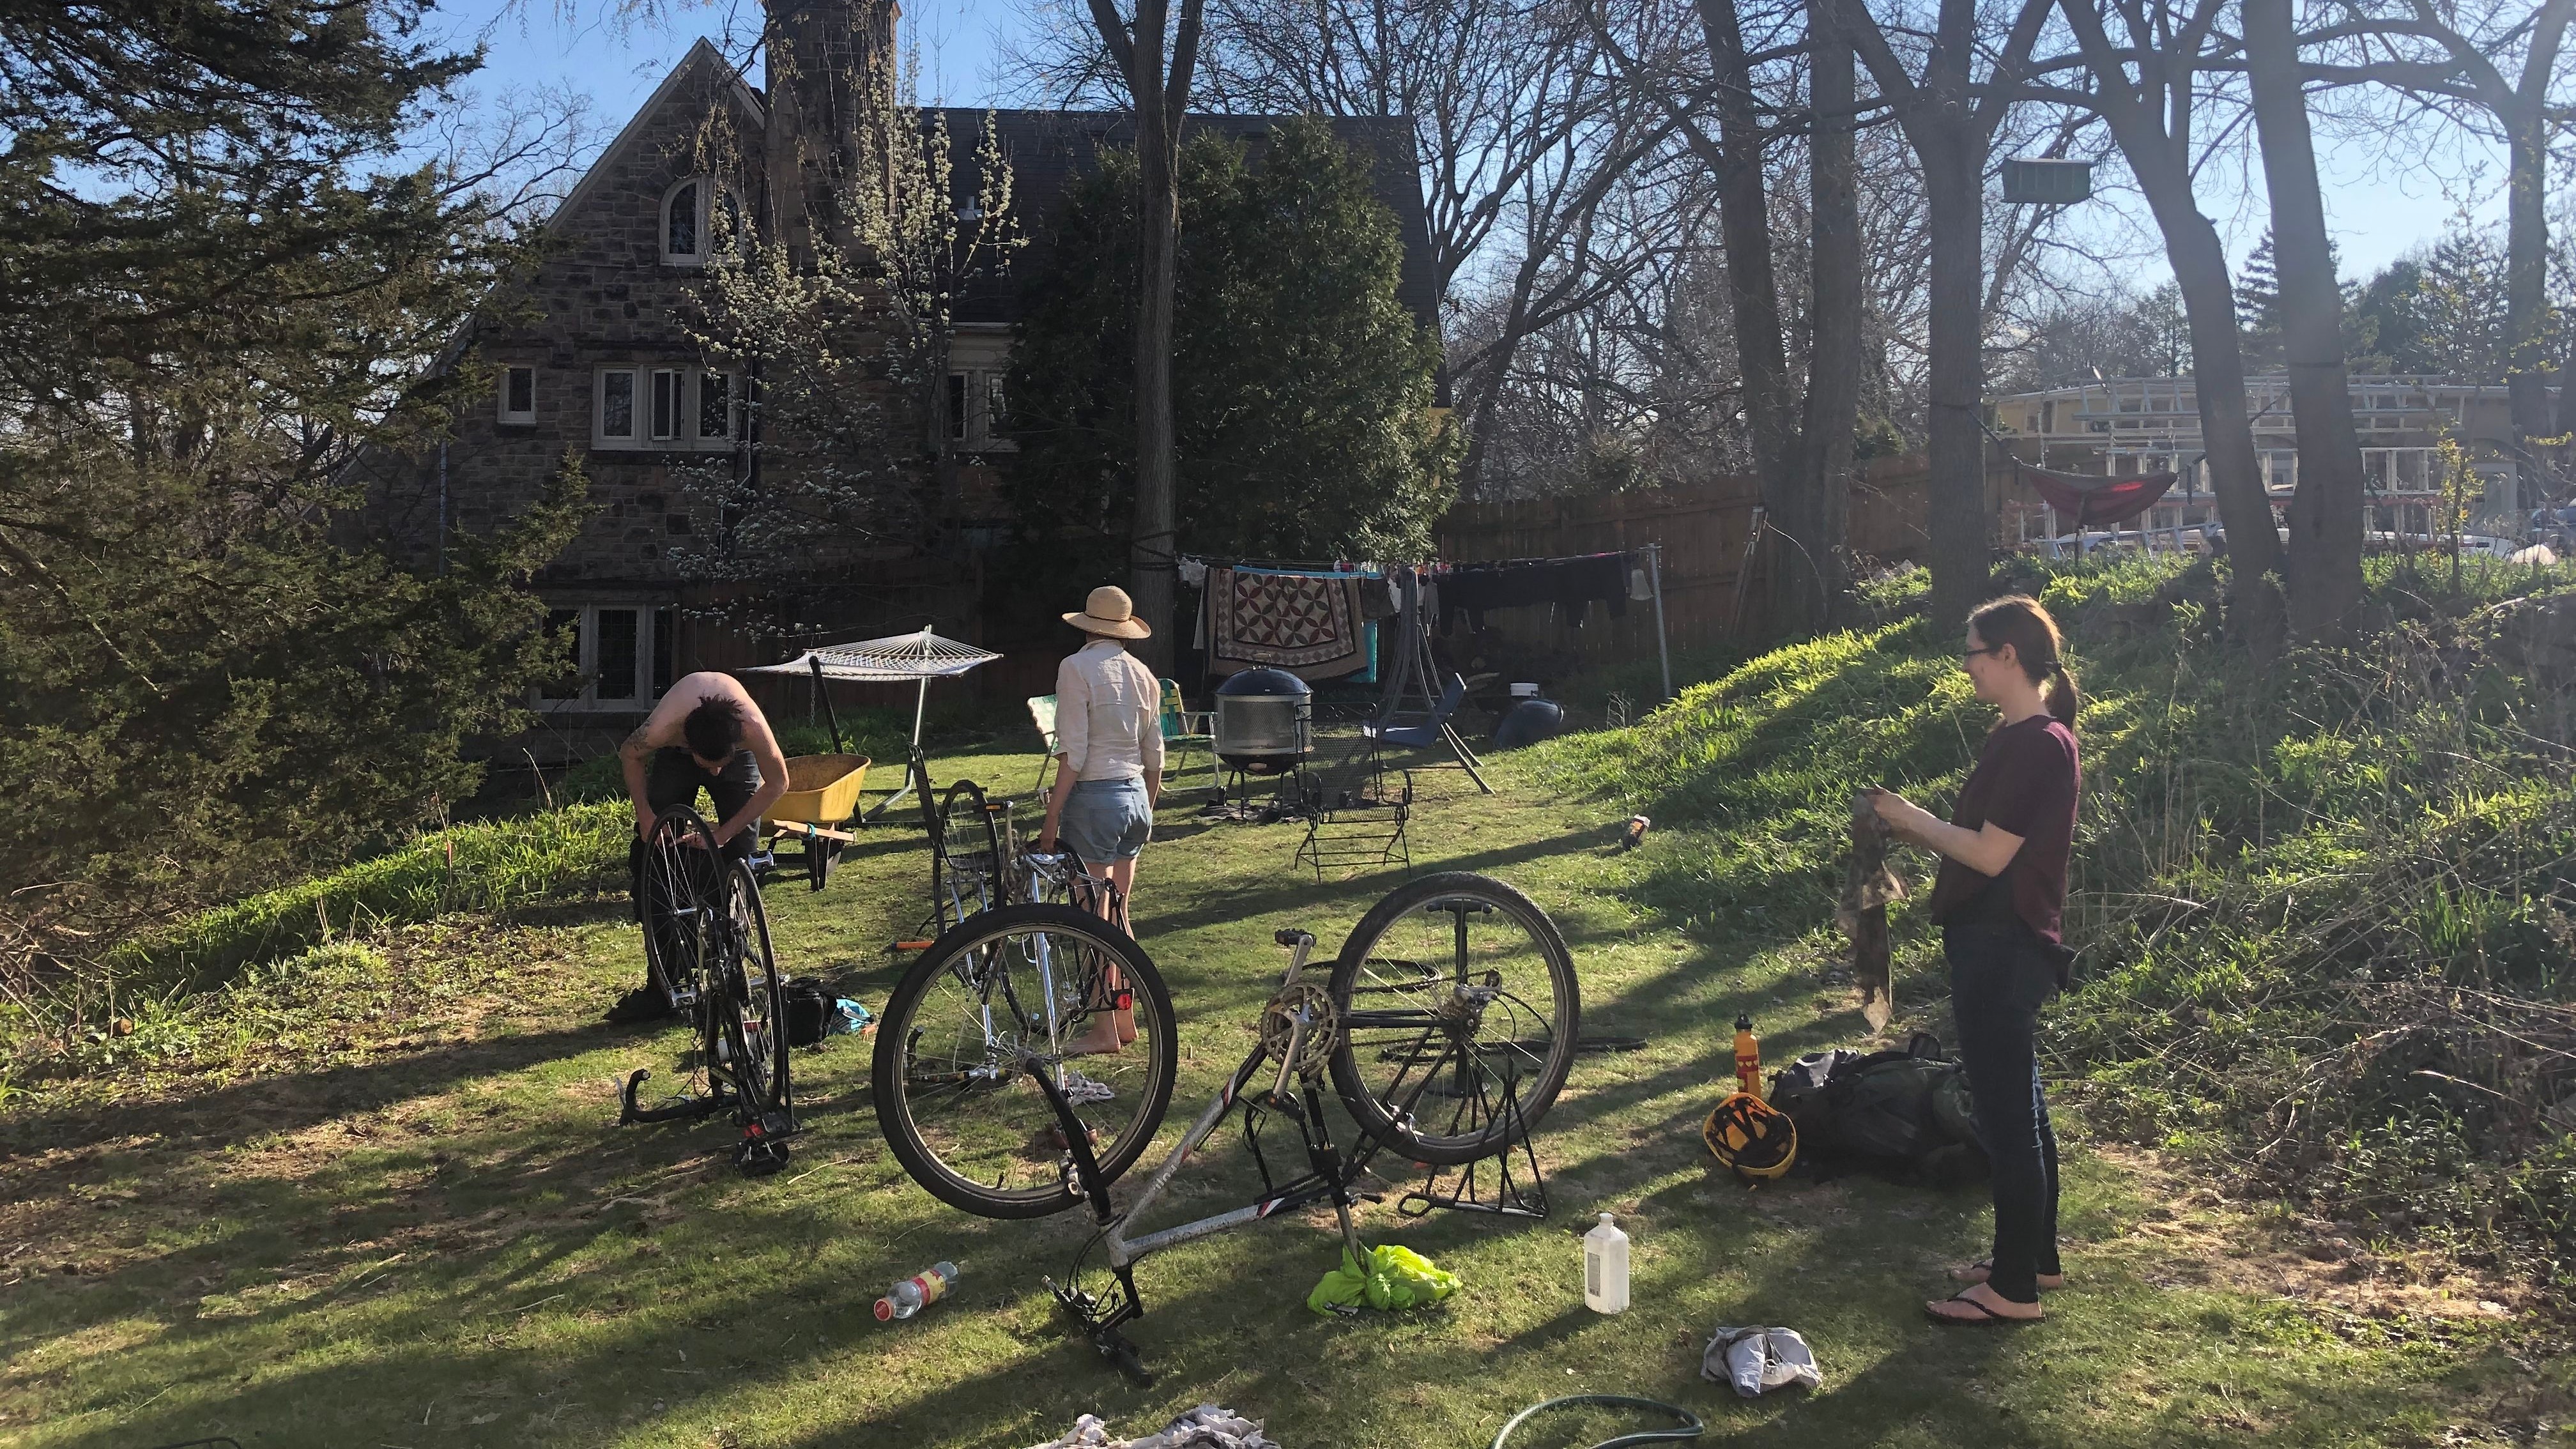 Summiteers tune-up bikes on the front lawn. (Circa summer 2020)